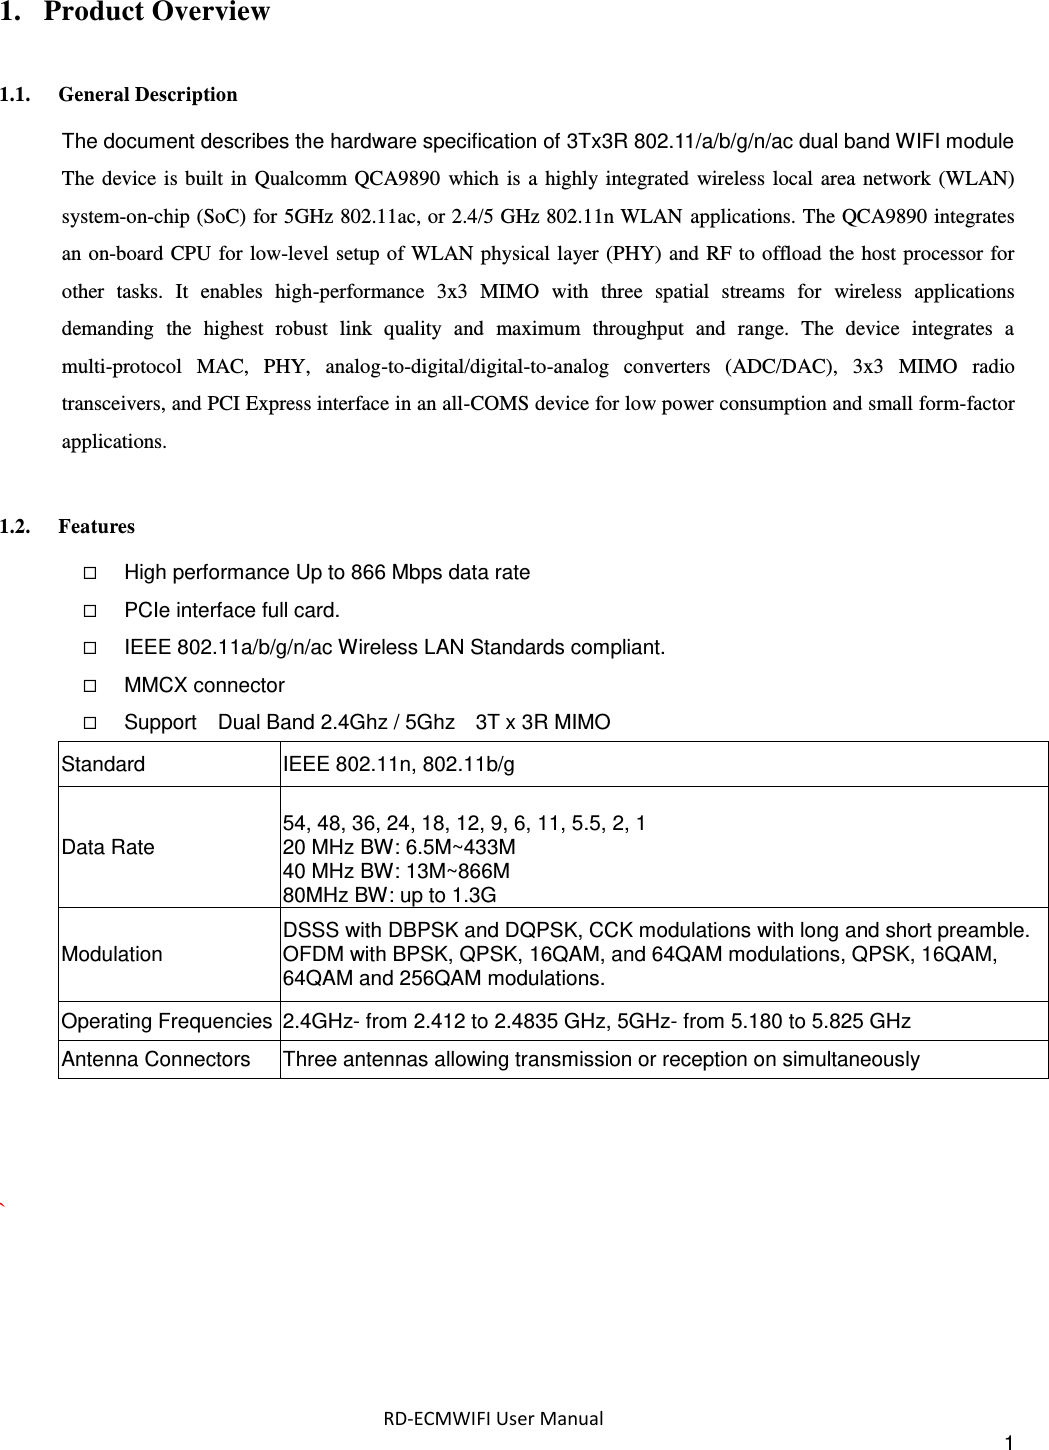  RD-ECMWIFI User Manual 1 1. Product Overview 1.1. General Description The document describes the hardware specification of 3Tx3R 802.11/a/b/g/n/ac dual band WIFI module             The device  is built  in Qualcomm QCA9890  which  is a  highly integrated  wireless  local  area network  (WLAN) system-on-chip (SoC) for 5GHz 802.11ac, or 2.4/5 GHz 802.11n WLAN  applications. The QCA9890 integrates an on-board CPU  for  low-level setup of WLAN physical layer (PHY) and RF to offload the host processor for other  tasks.  It  enables  high-performance  3x3  MIMO  with  three  spatial  streams  for  wireless  applications demanding  the  highest  robust  link  quality  and  maximum  throughput  and  range.  The  device  integrates  a multi-protocol  MAC,  PHY,  analog-to-digital/digital-to-analog  converters  (ADC/DAC),  3x3  MIMO  radio transceivers, and PCI Express interface in an all-COMS device for low power consumption and small form-factor applications.  1.2. Features  High performance Up to 866 Mbps data rate  PCIe interface full card.  IEEE 802.11a/b/g/n/ac Wireless LAN Standards compliant.  MMCX connector    Support    Dual Band 2.4Ghz / 5Ghz    3T x 3R MIMO Standard IEEE 802.11n, 802.11b/g Data Rate  54, 48, 36, 24, 18, 12, 9, 6, 11, 5.5, 2, 1 20 MHz BW: 6.5M~433M 40 MHz BW: 13M~866M 80MHz BW: up to 1.3G Modulation DSSS with DBPSK and DQPSK, CCK modulations with long and short preamble. OFDM with BPSK, QPSK, 16QAM, and 64QAM modulations, QPSK, 16QAM, 64QAM and 256QAM modulations. Operating Frequencies 2.4GHz- from 2.412 to 2.4835 GHz, 5GHz- from 5.180 to 5.825 GHz Antenna Connectors Three antennas allowing transmission or reception on simultaneously    `  